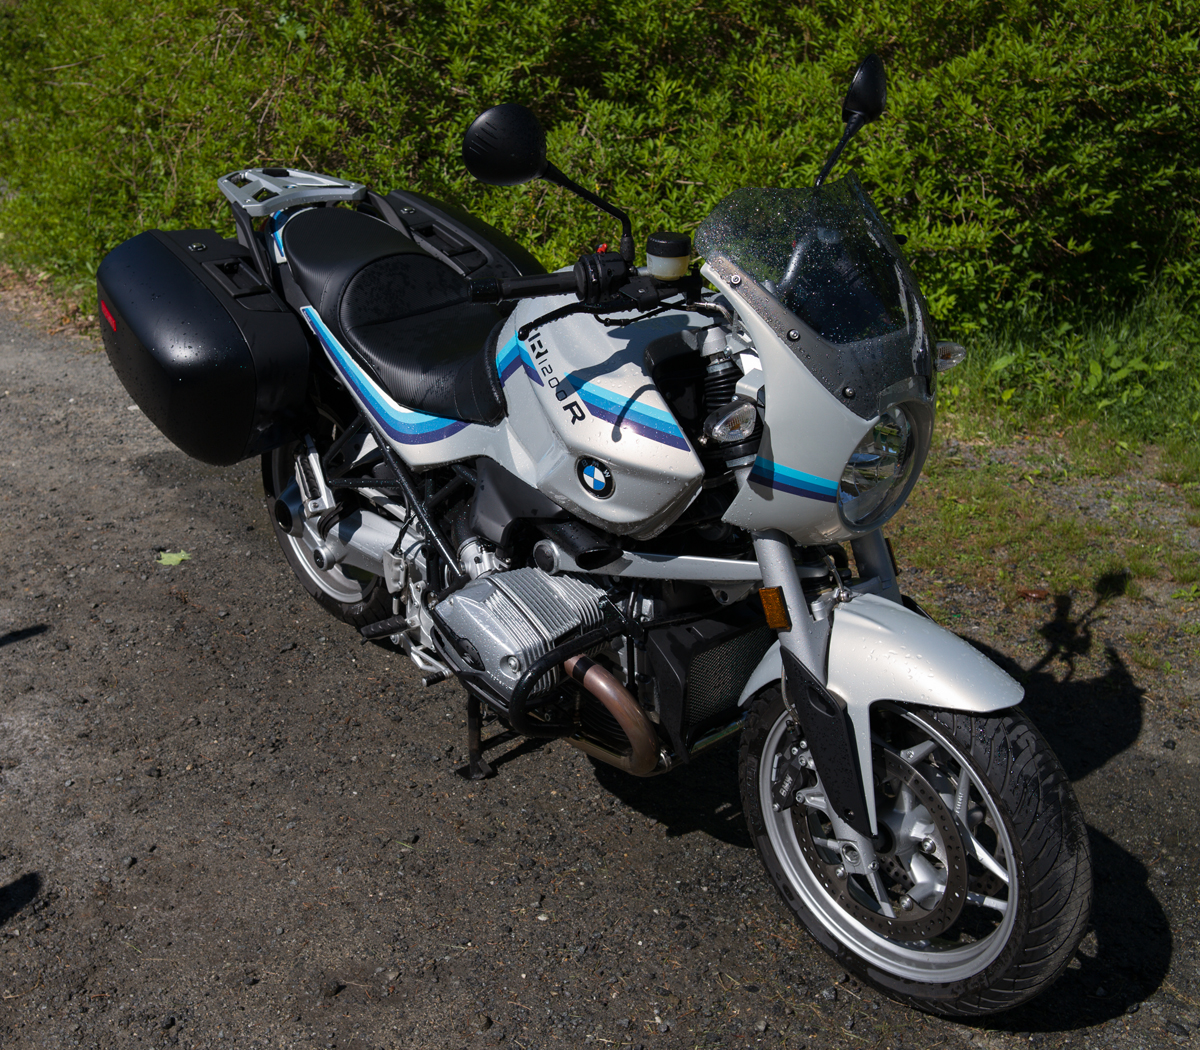 Bmw motorcycle dealers in vermont #1